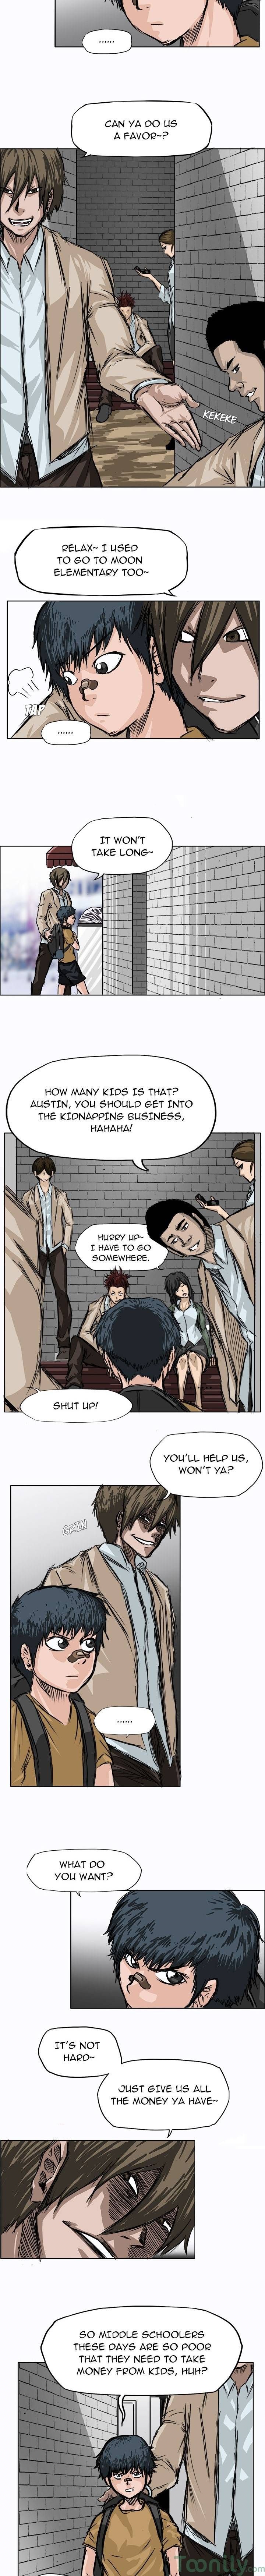 Boss in School Chapter 2 page 6